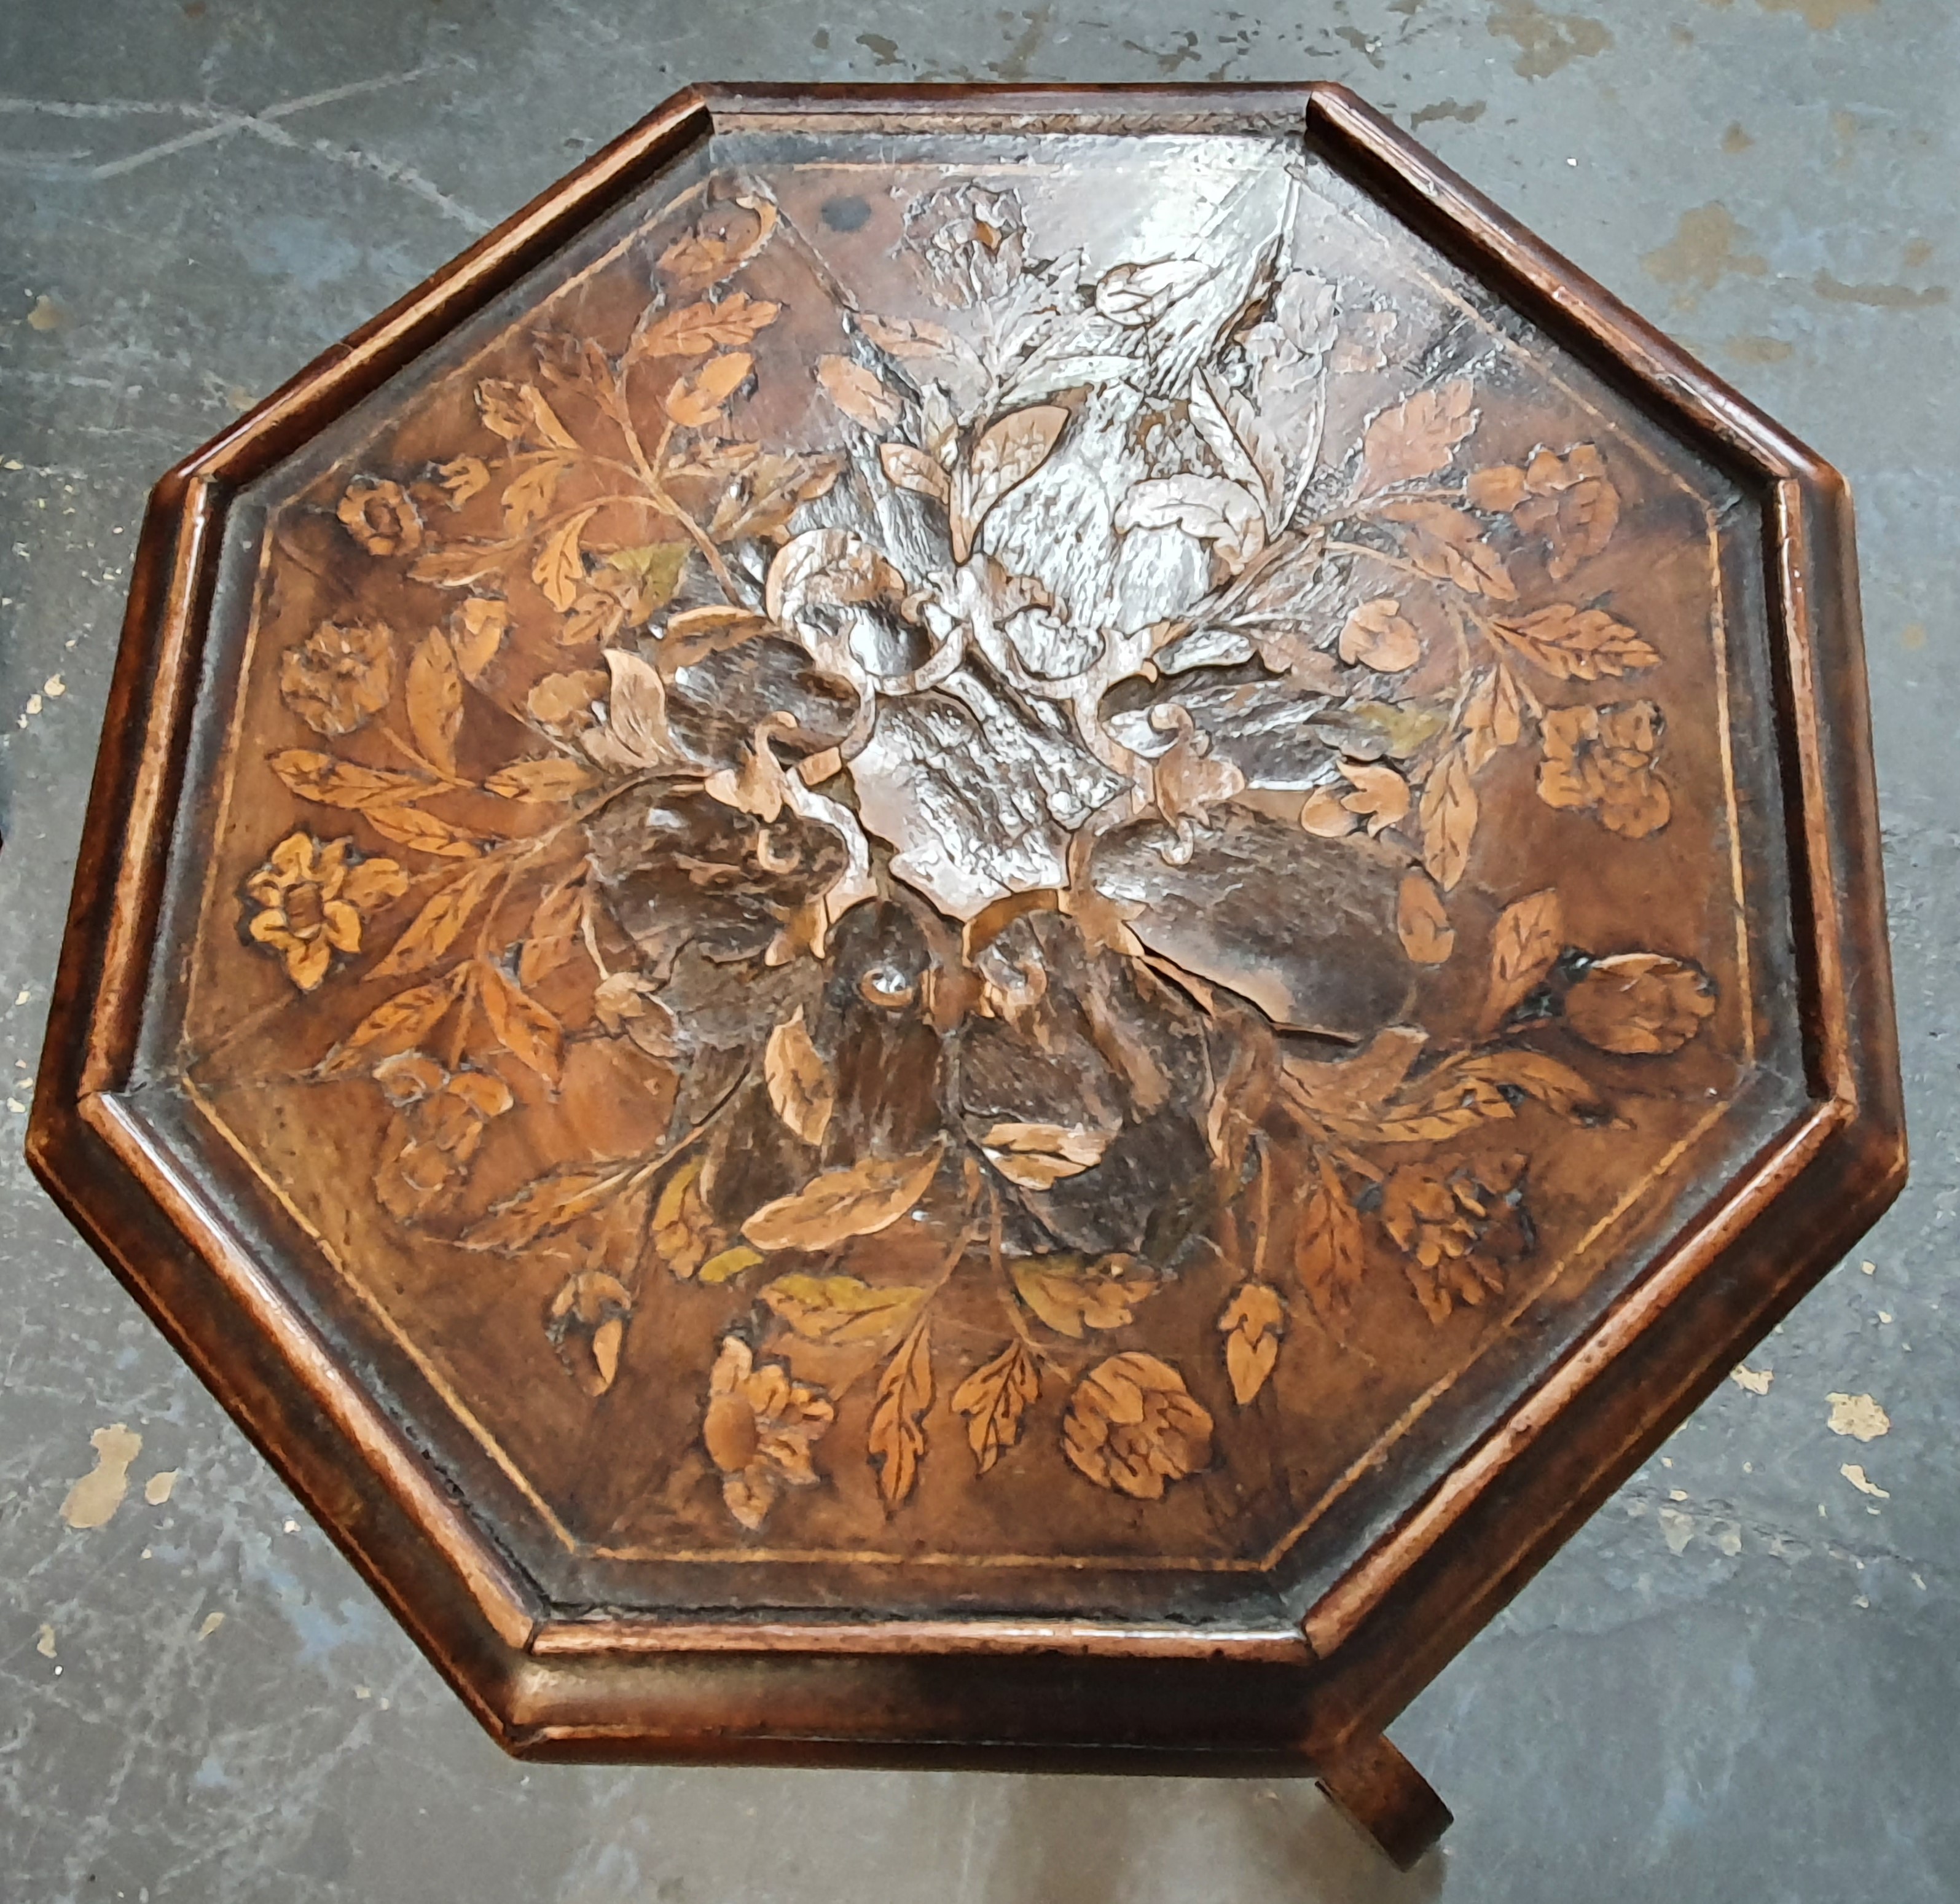 A DUTCH WALNUT AND MARQUETRY CANDLE STAND, IN THE 17TH CENTURY STYLE, 19TH CENTURY - Image 2 of 21